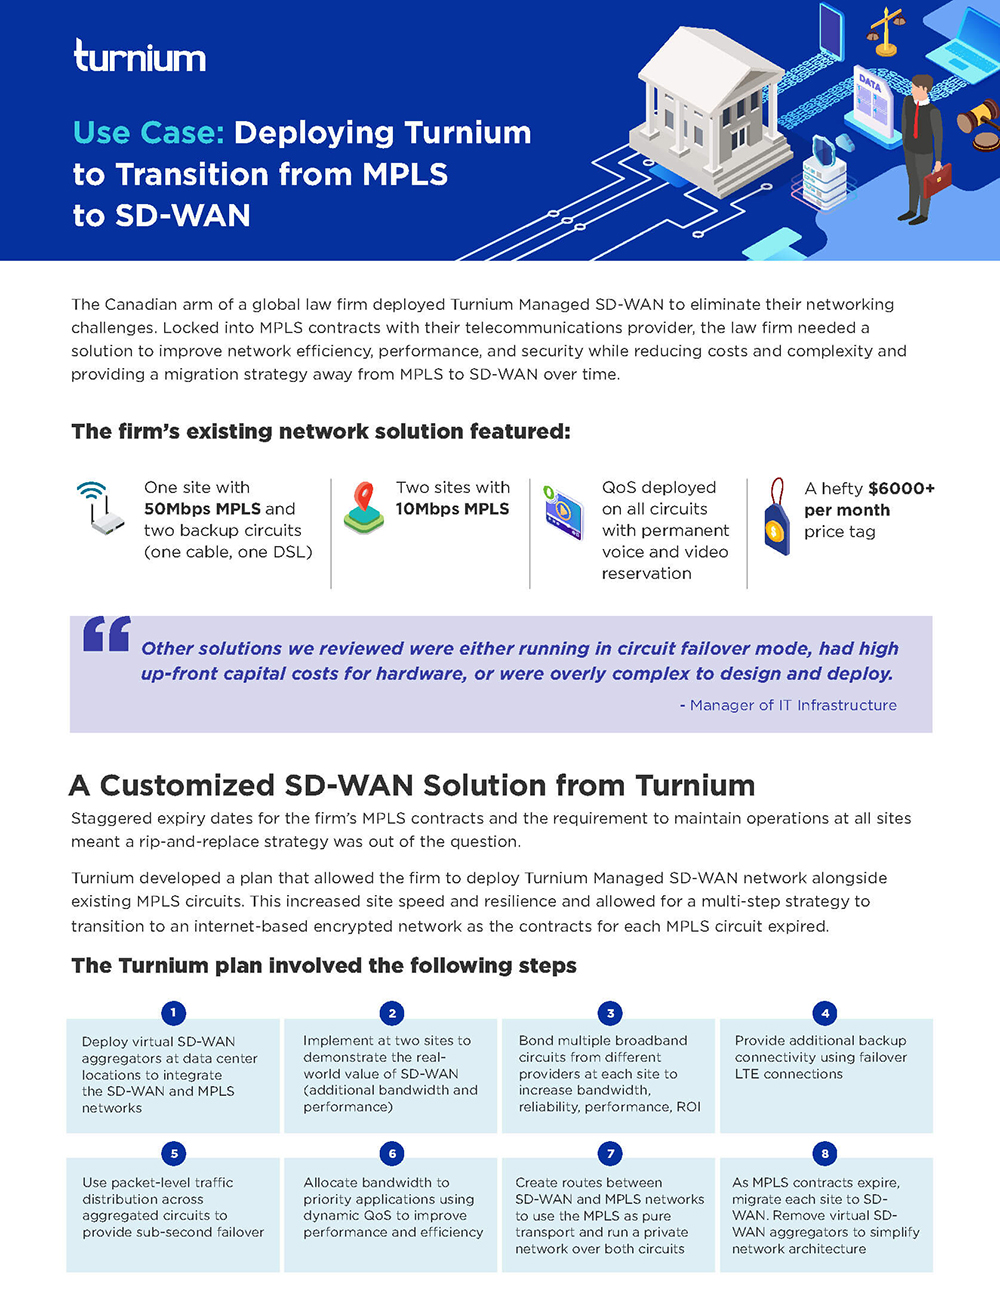 Deploying Turnium to Transition from MPLS to SD-WAN